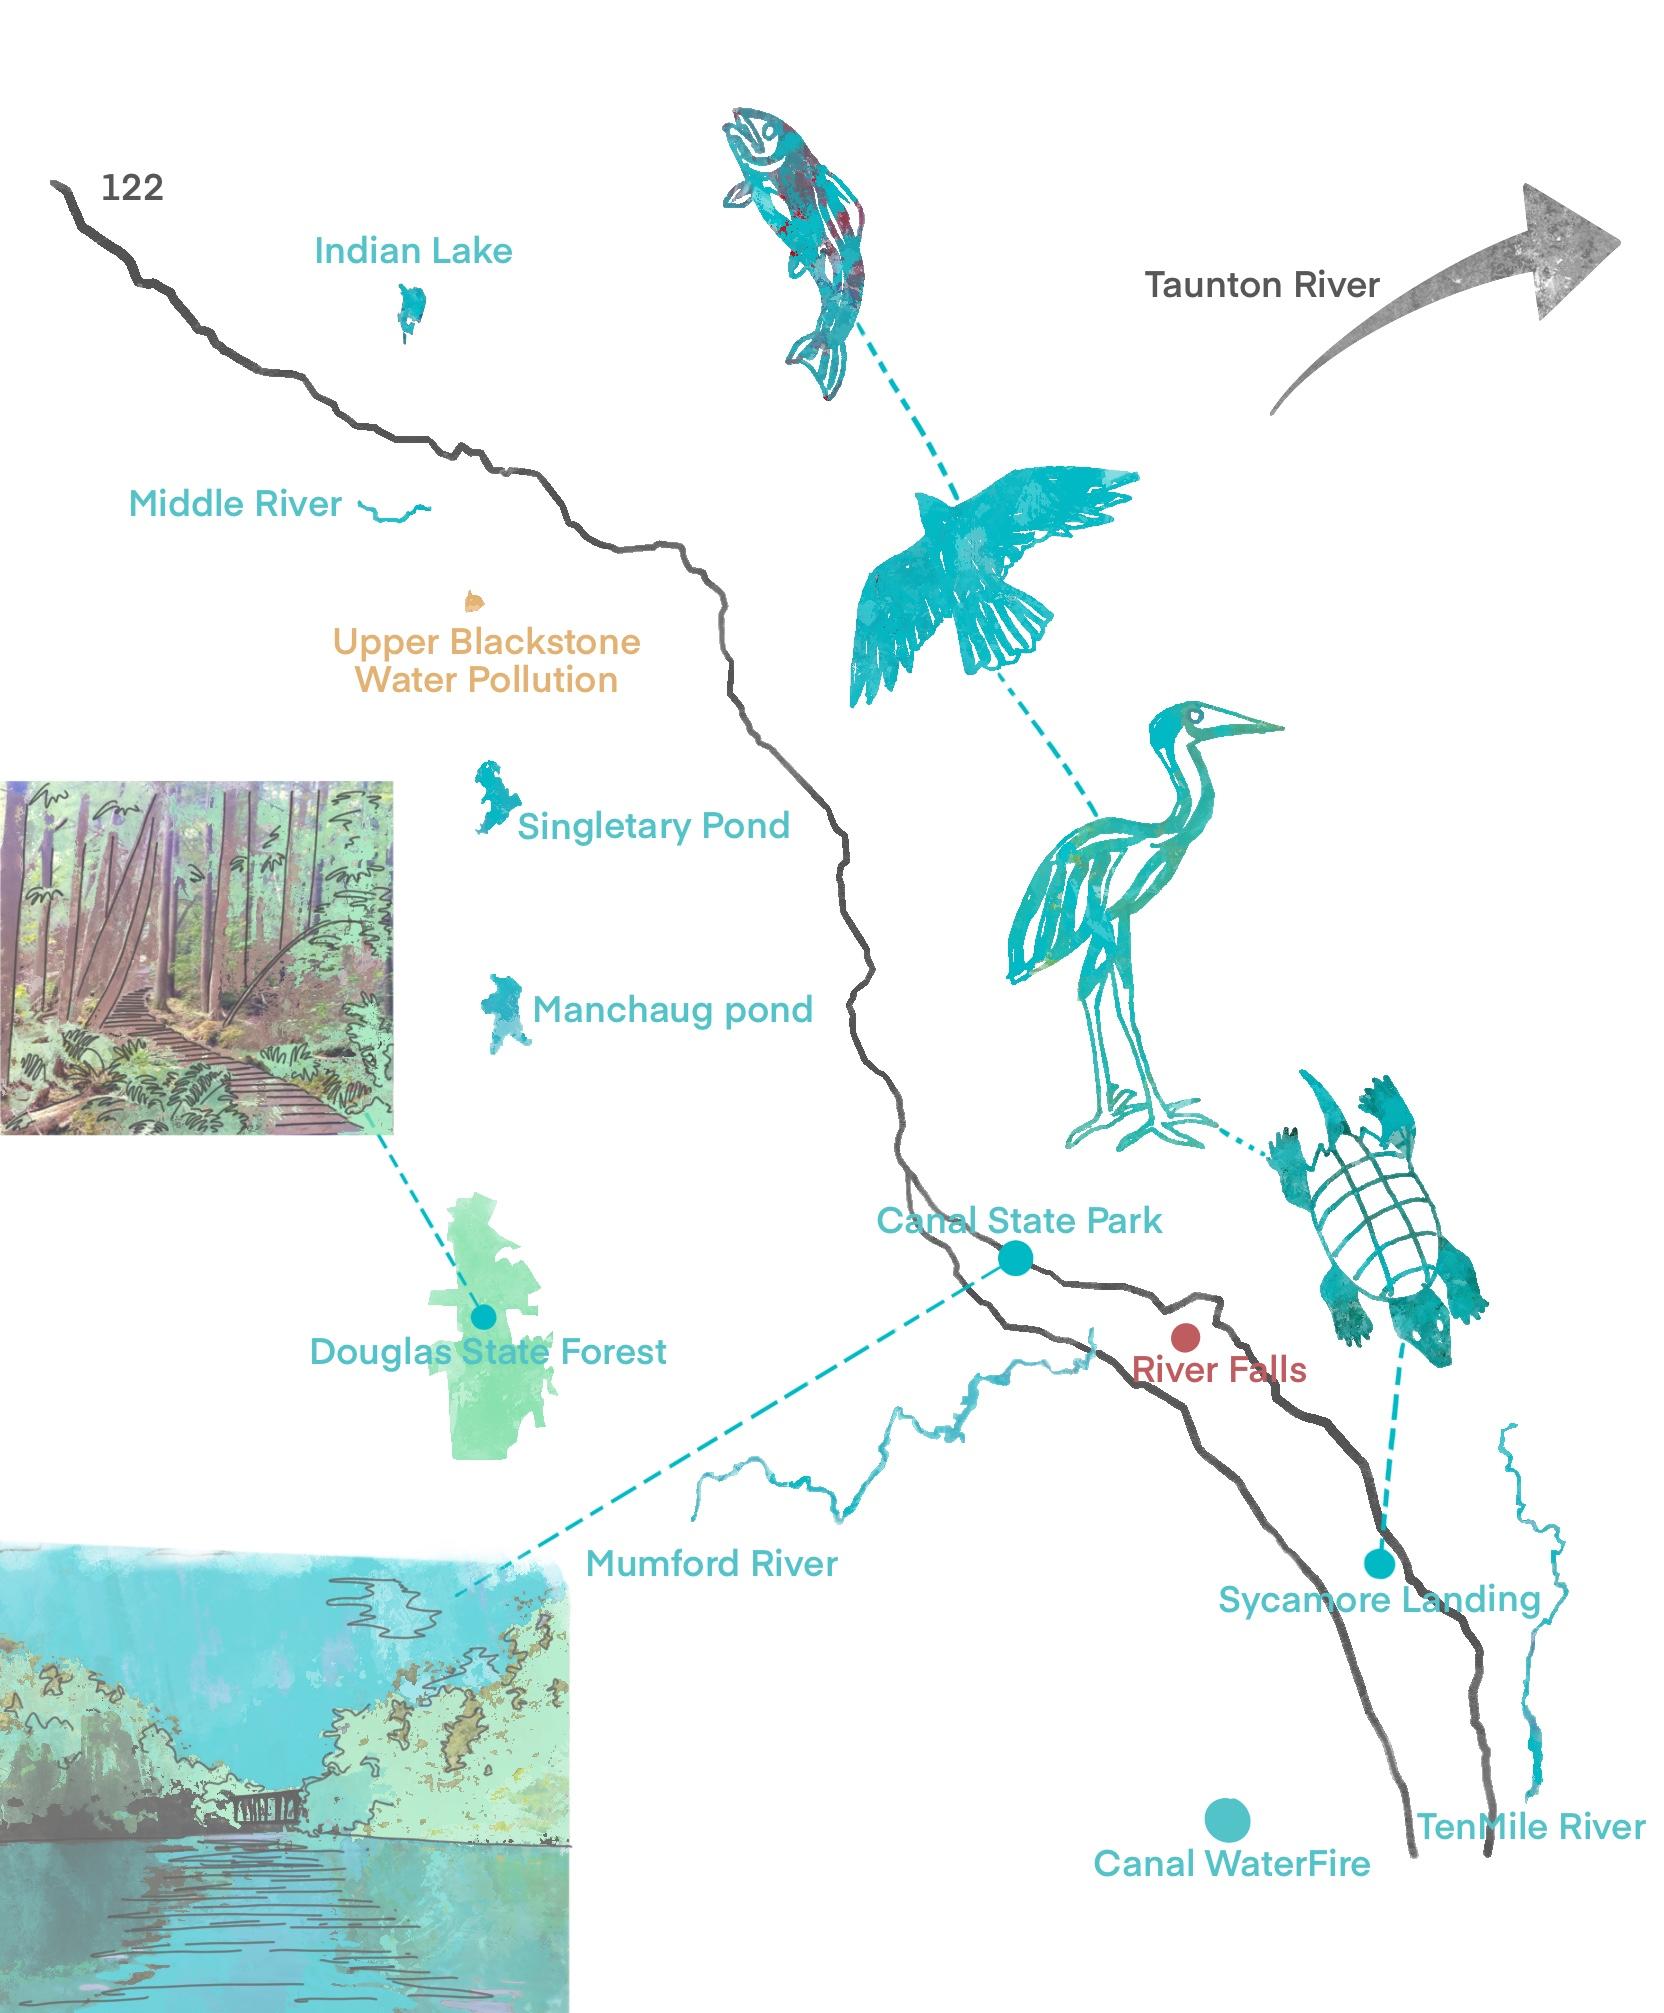 A map of the Blackstone River watershed showing a turtle, a Great Blue Heron, a Hawk, a fish, roads, parks, and other places of import.